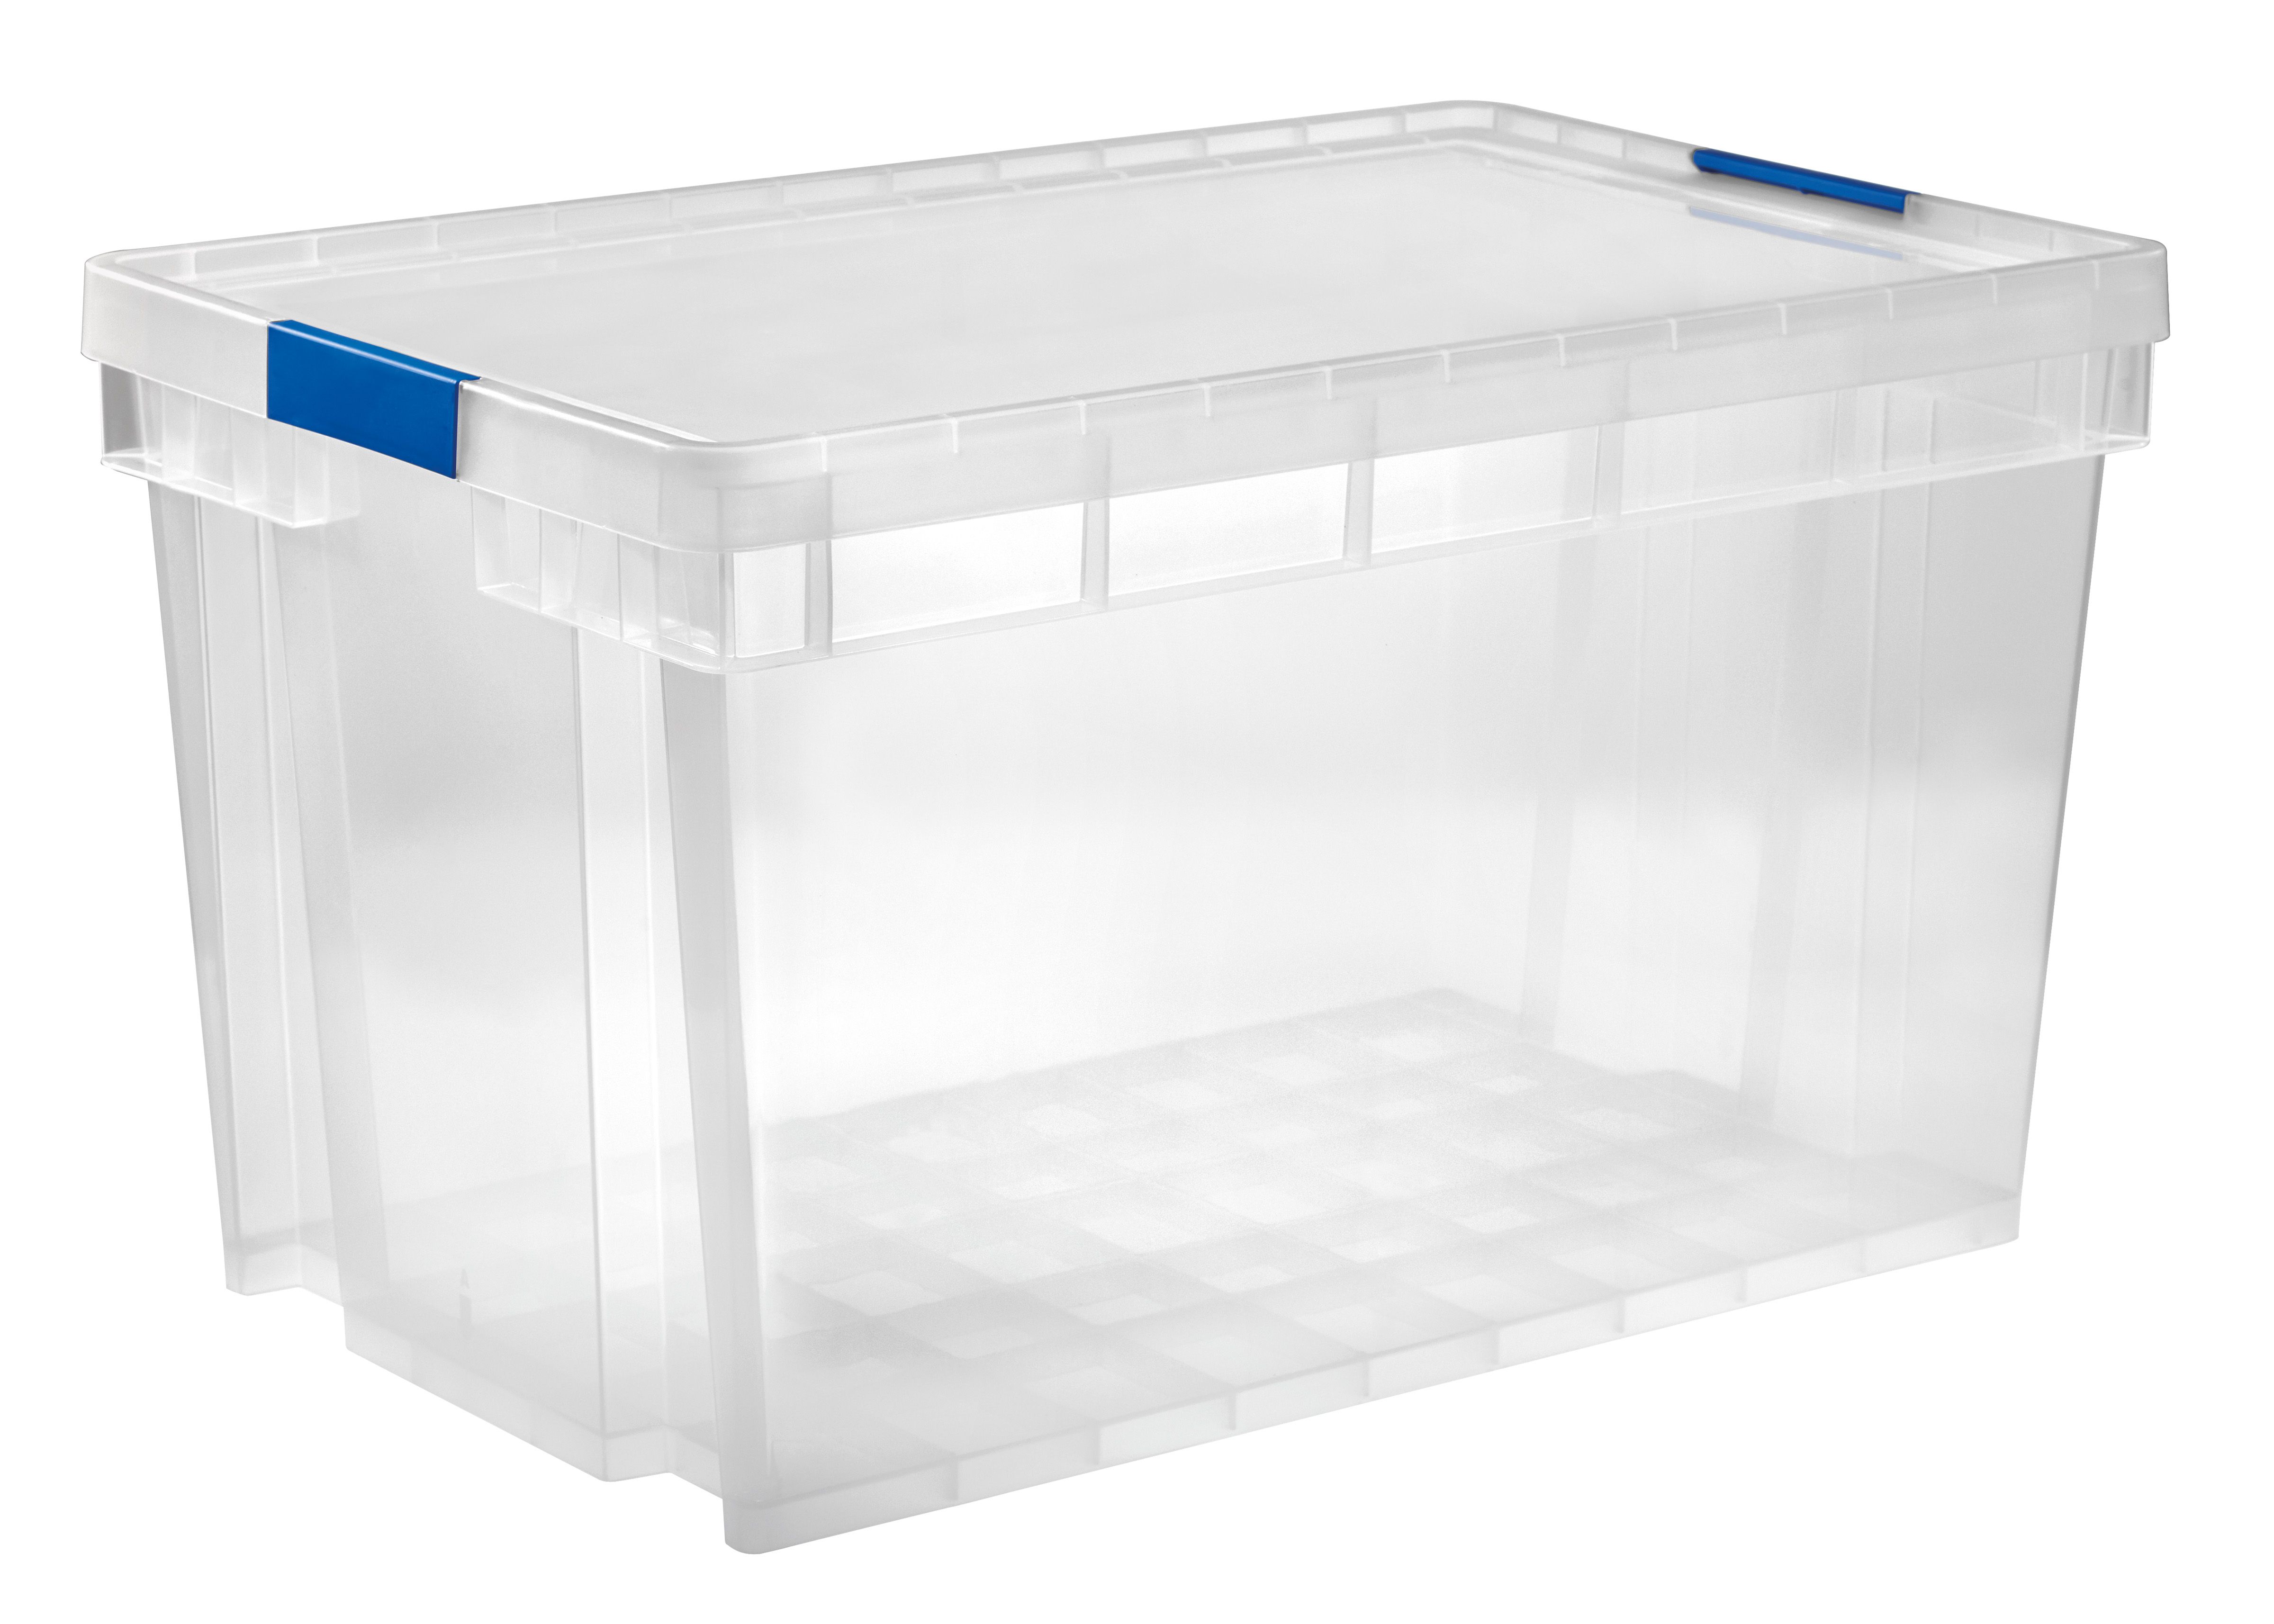 https://kingfisher.scene7.com/is/image/Kingfisher/form-xago-heavy-duty-clear-94l-plastic-stackable-storage-box~3663602314196_01c?$MOB_PREV$&$width=618&$height=618